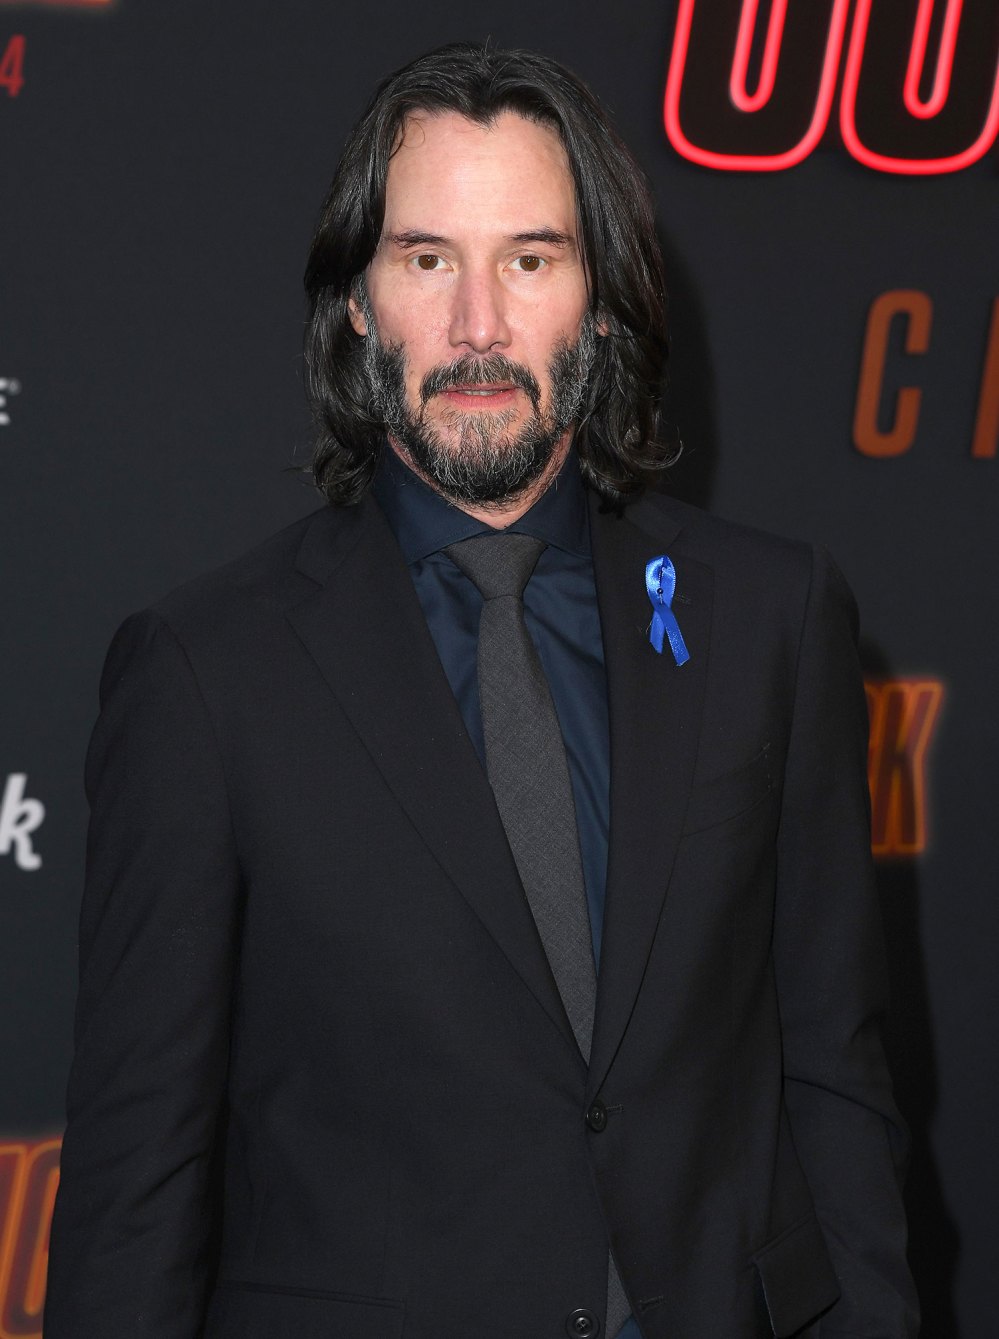 Keanu Reeves Home Was Reportedly Raided by Masked Intruders Who Stole a Firearm